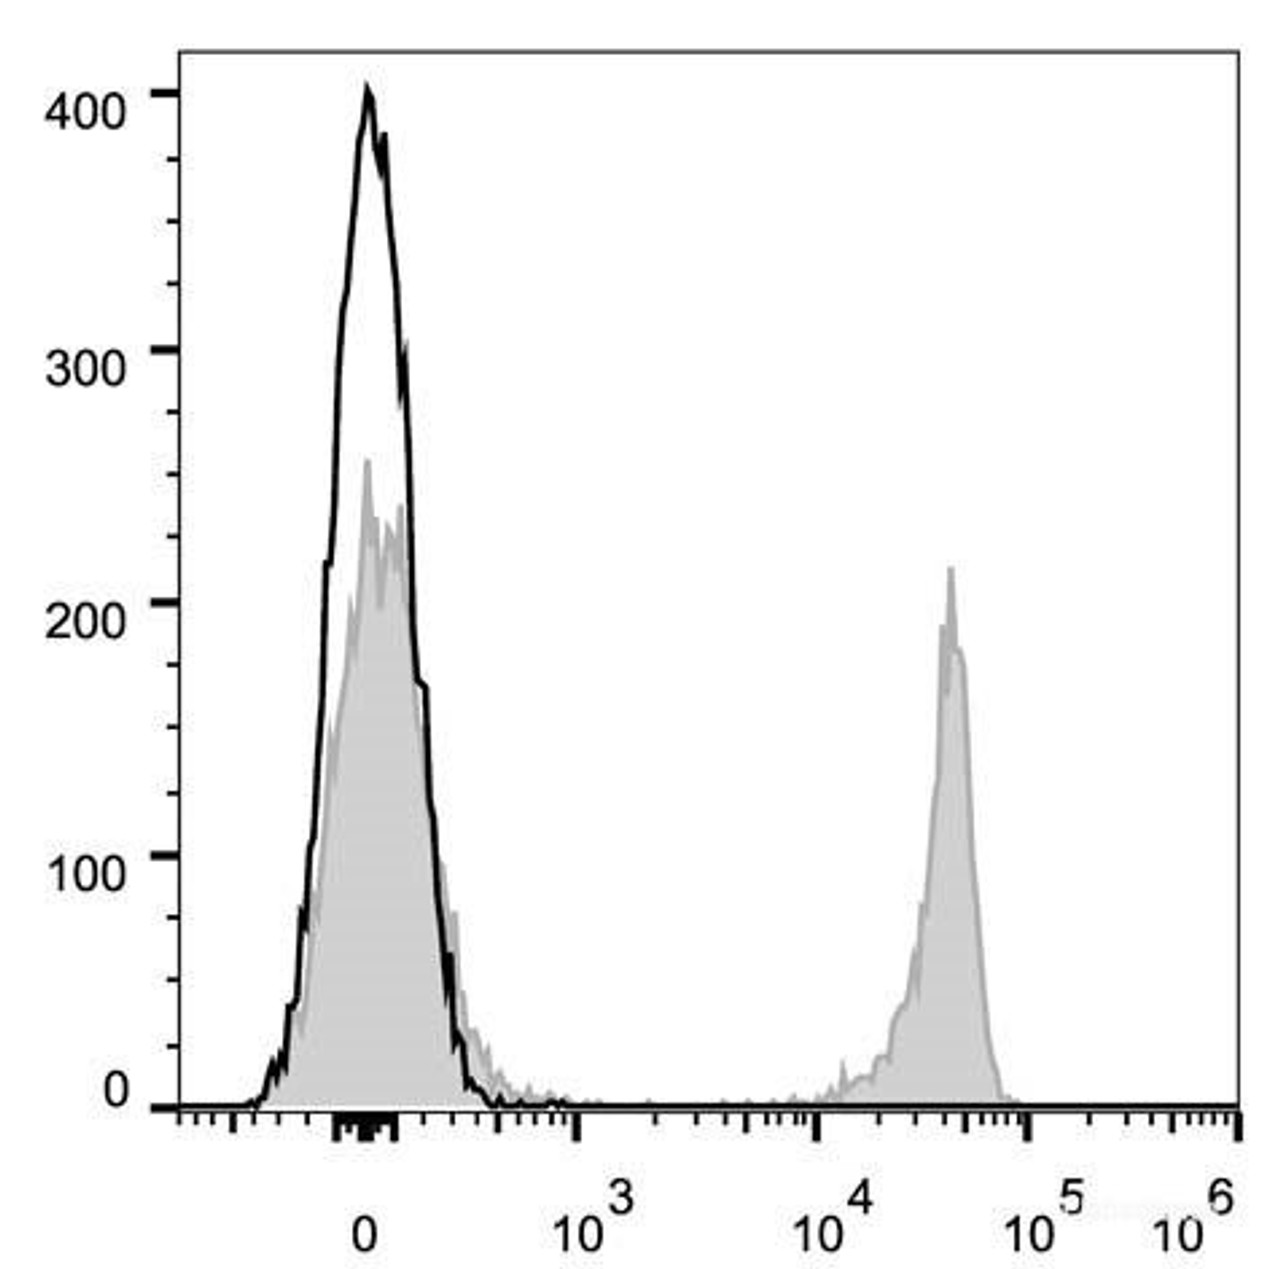 C57BL/6 murine splenocytes are stained with AF647 Anti-Mouse CD8a Antibody[Used at .5 μg/1<sup>6</sup> cells dilution](filled gray histogram). Unstained splenocytes (empty black histogram) are used as control.